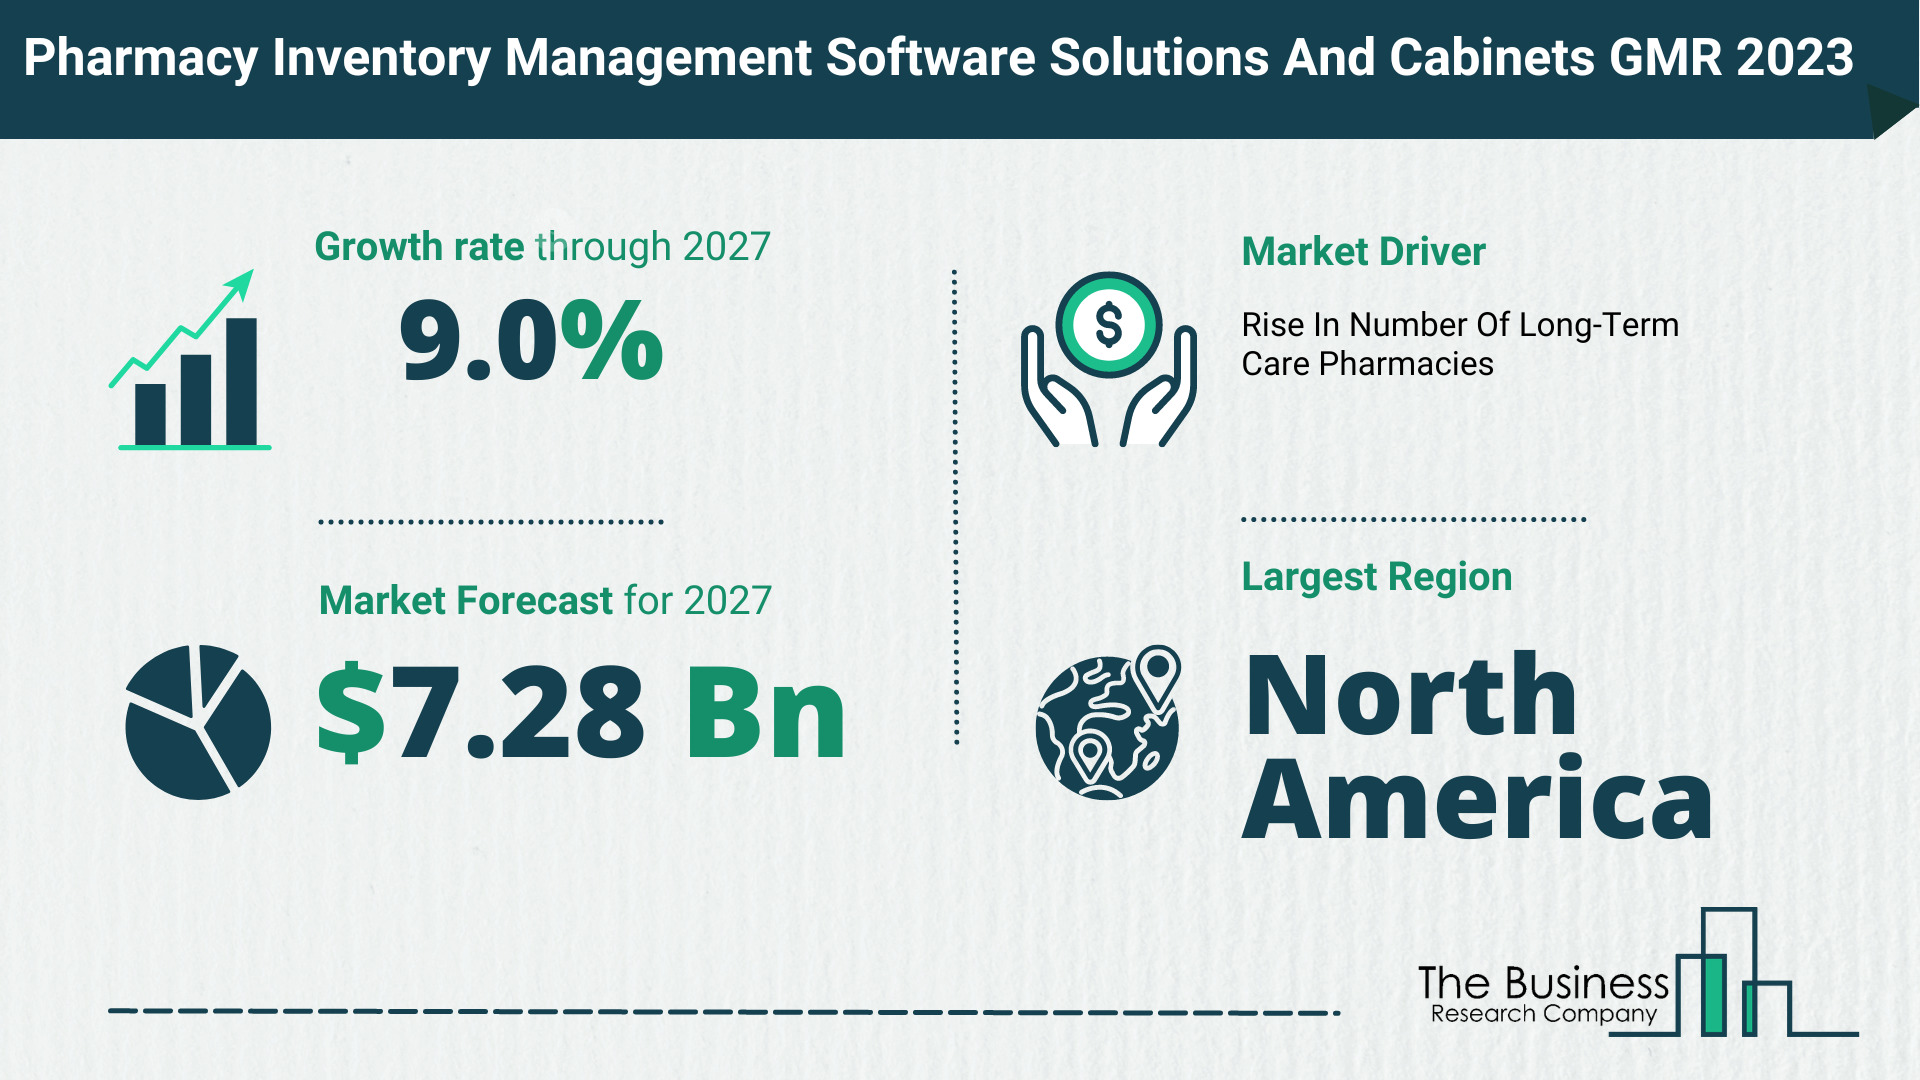 Pharmacy Inventory Management Software Solutions And Cabinets Market Size, Share, And Growth Rate Analysis 2023